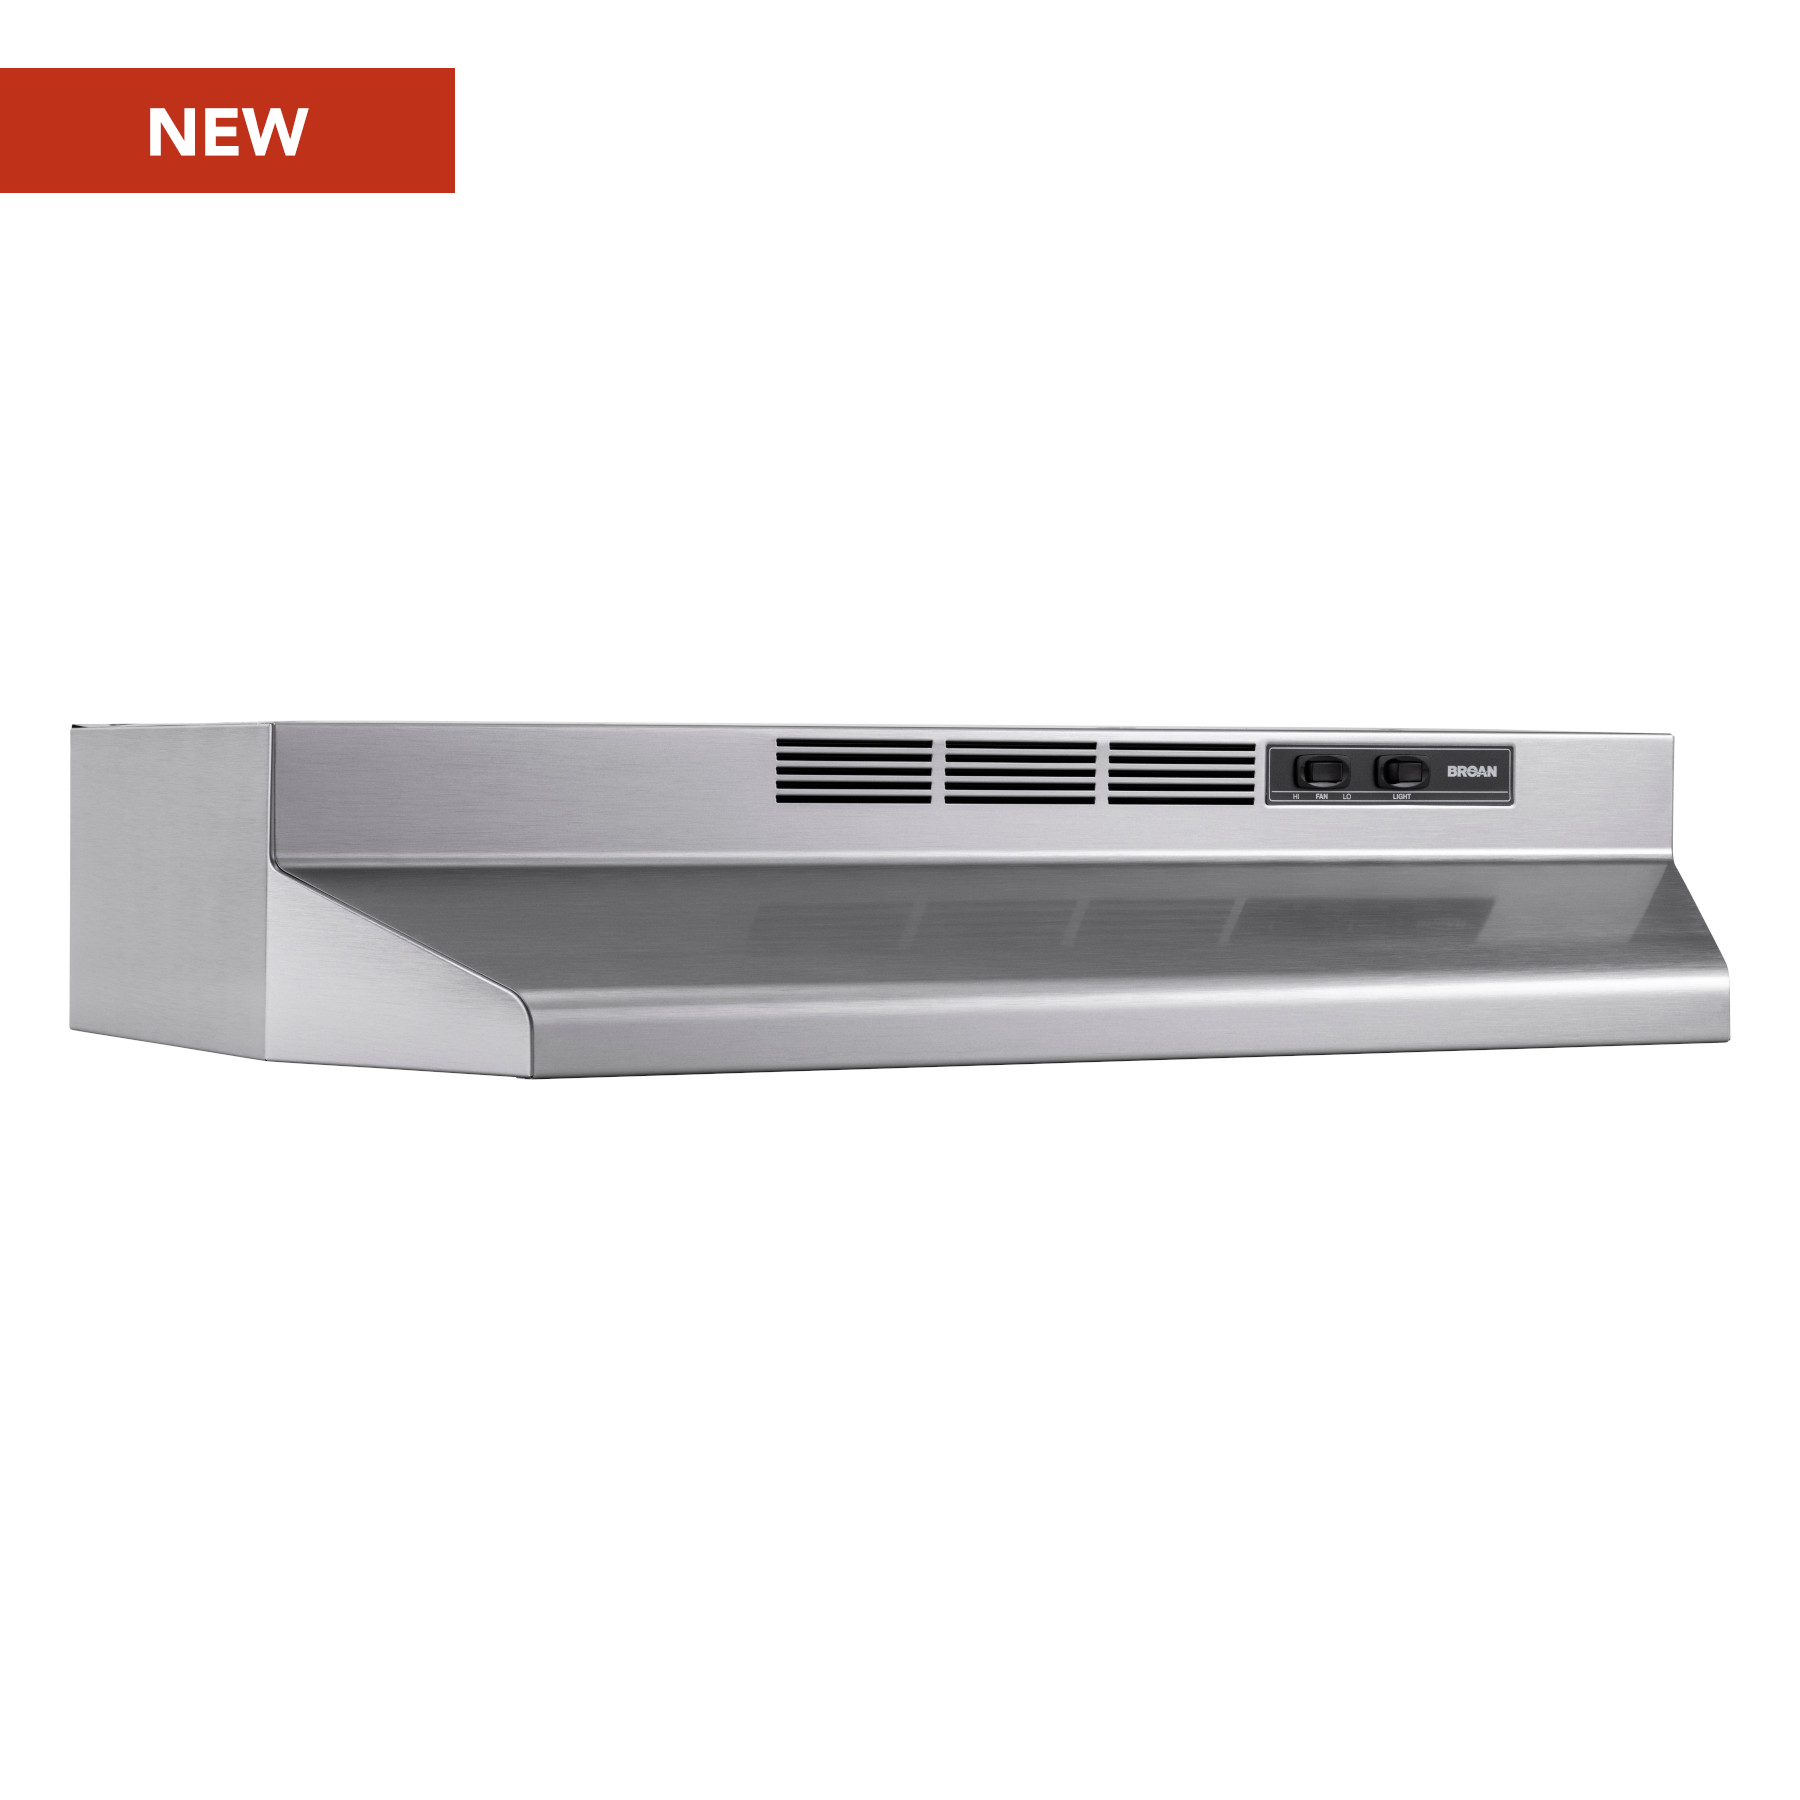 403002 by Broan - Broan® 30-Inch Ducted Under-Cabinet Range Hood, 210 MAX  Blower CFM, Bisque